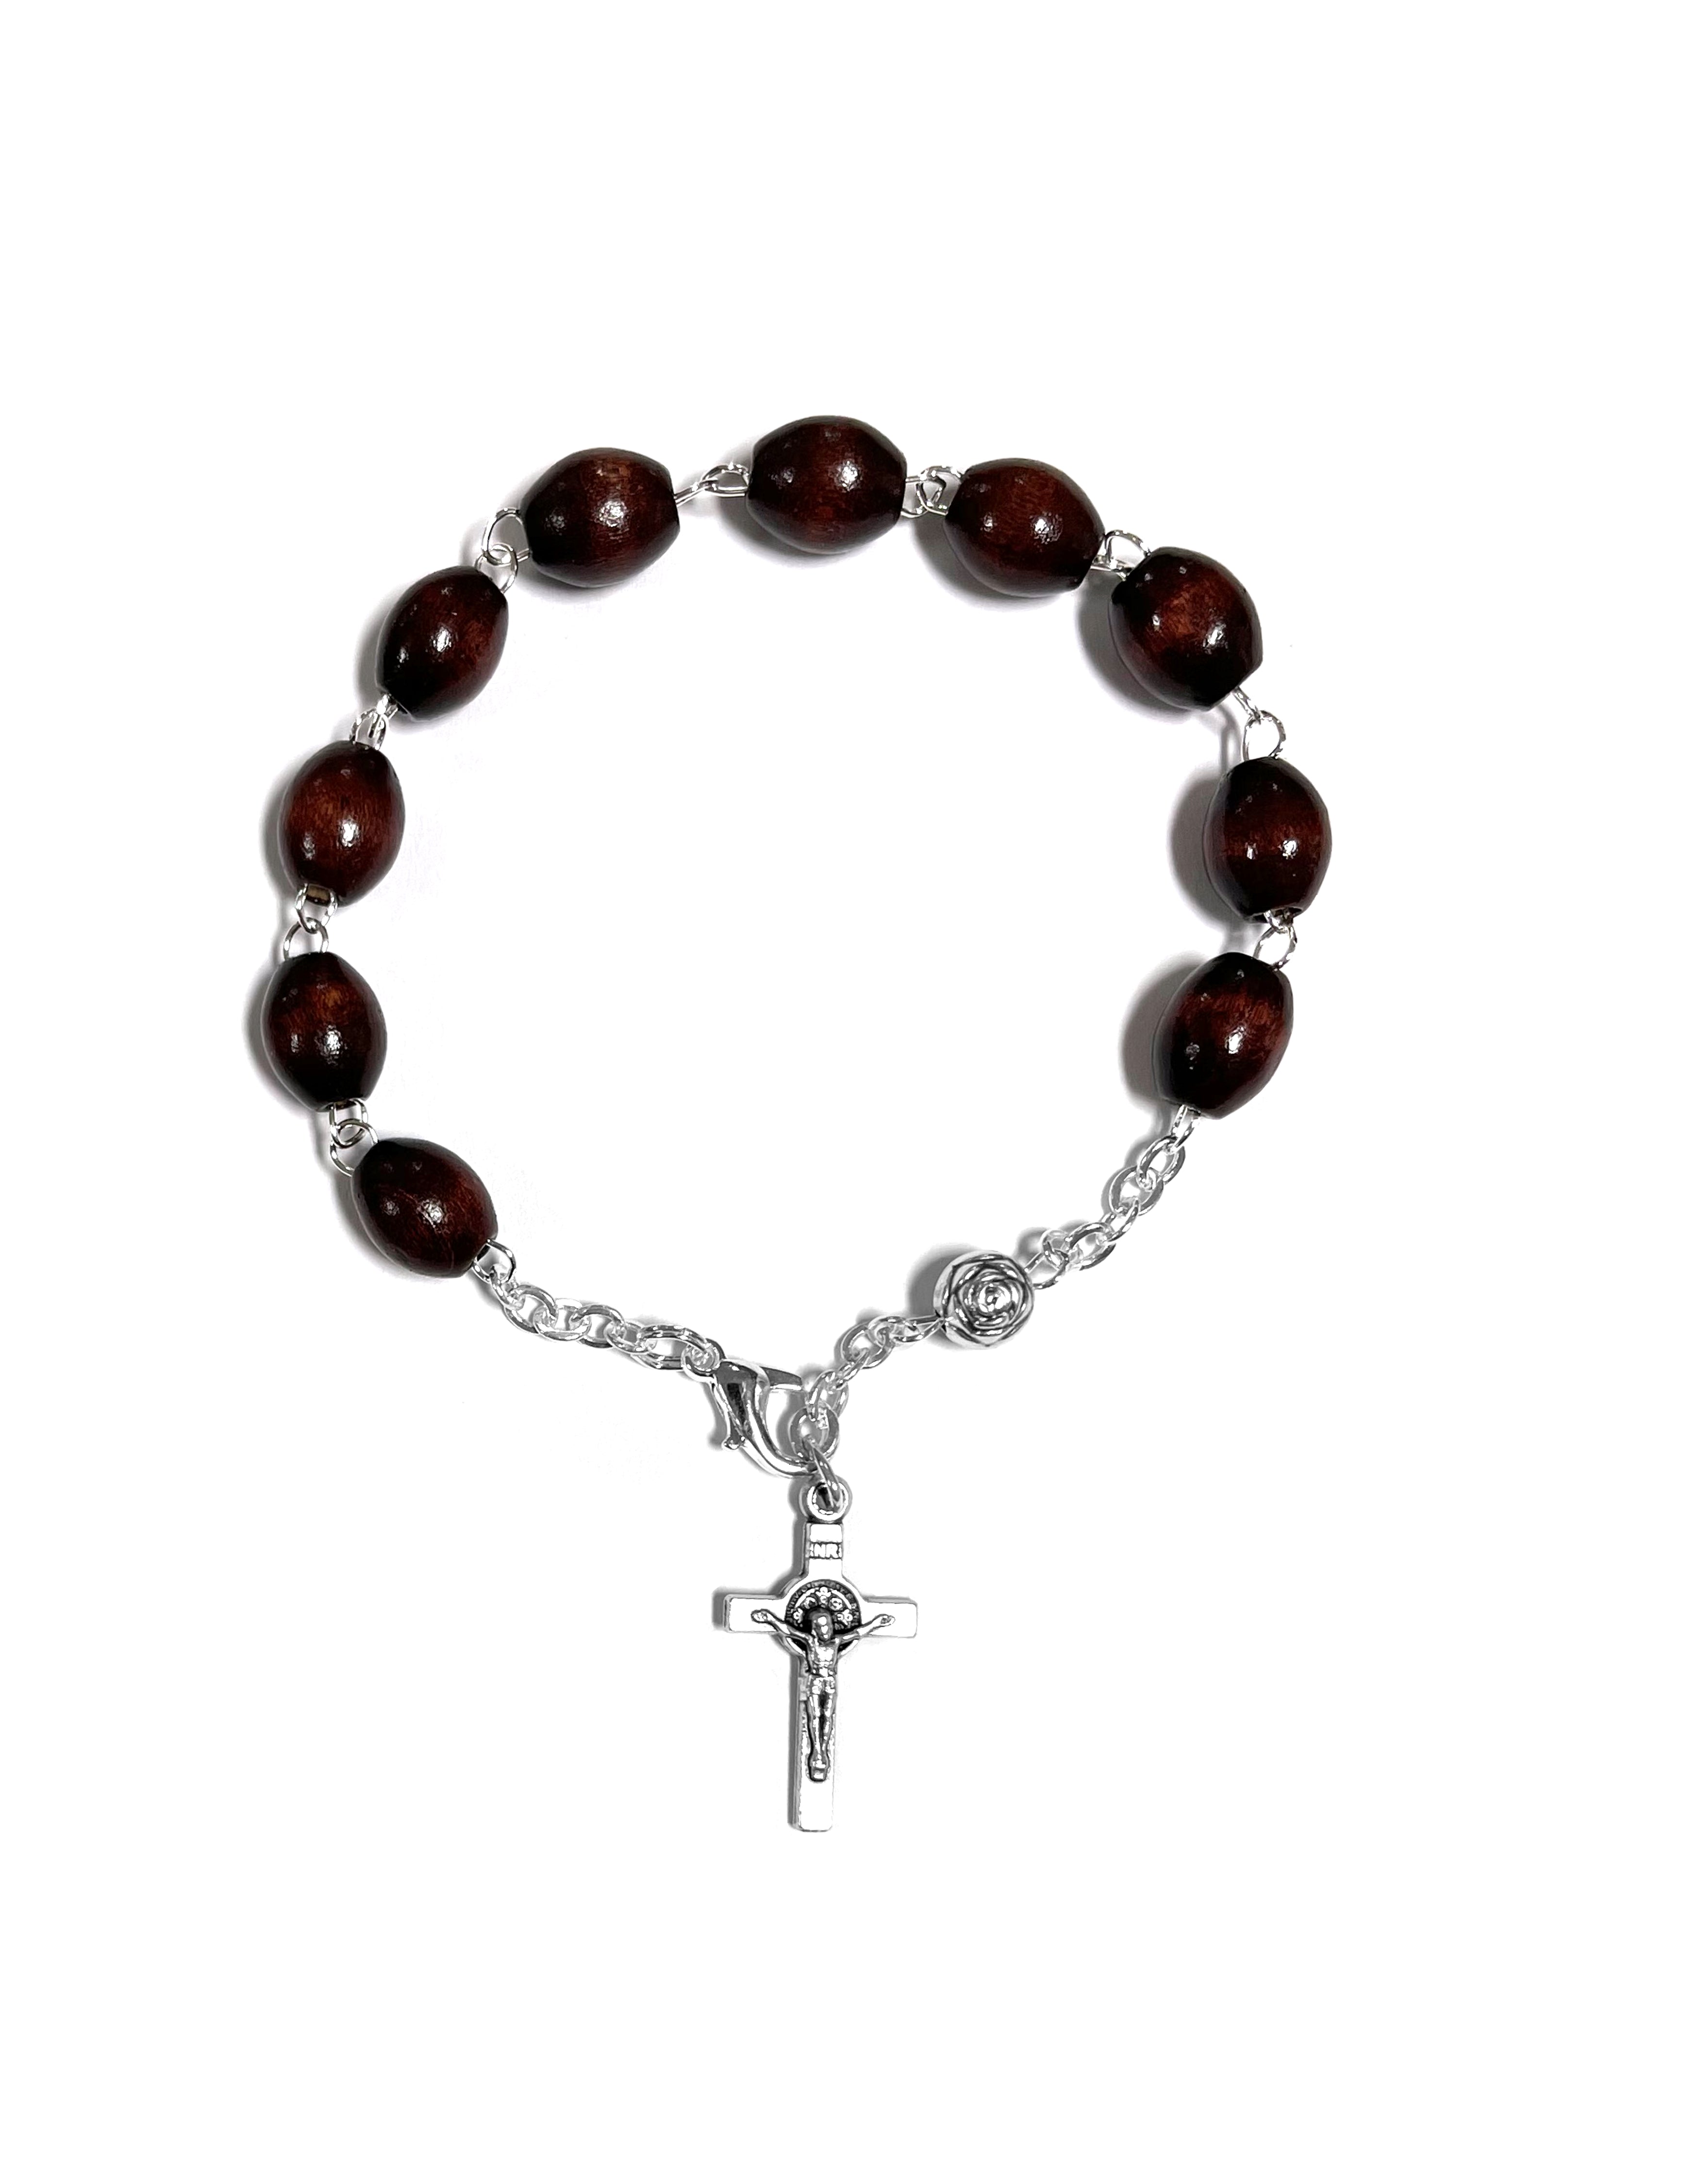 Saint Benedict bracelet in brown wood with a rose and a small cross in oxidized silver